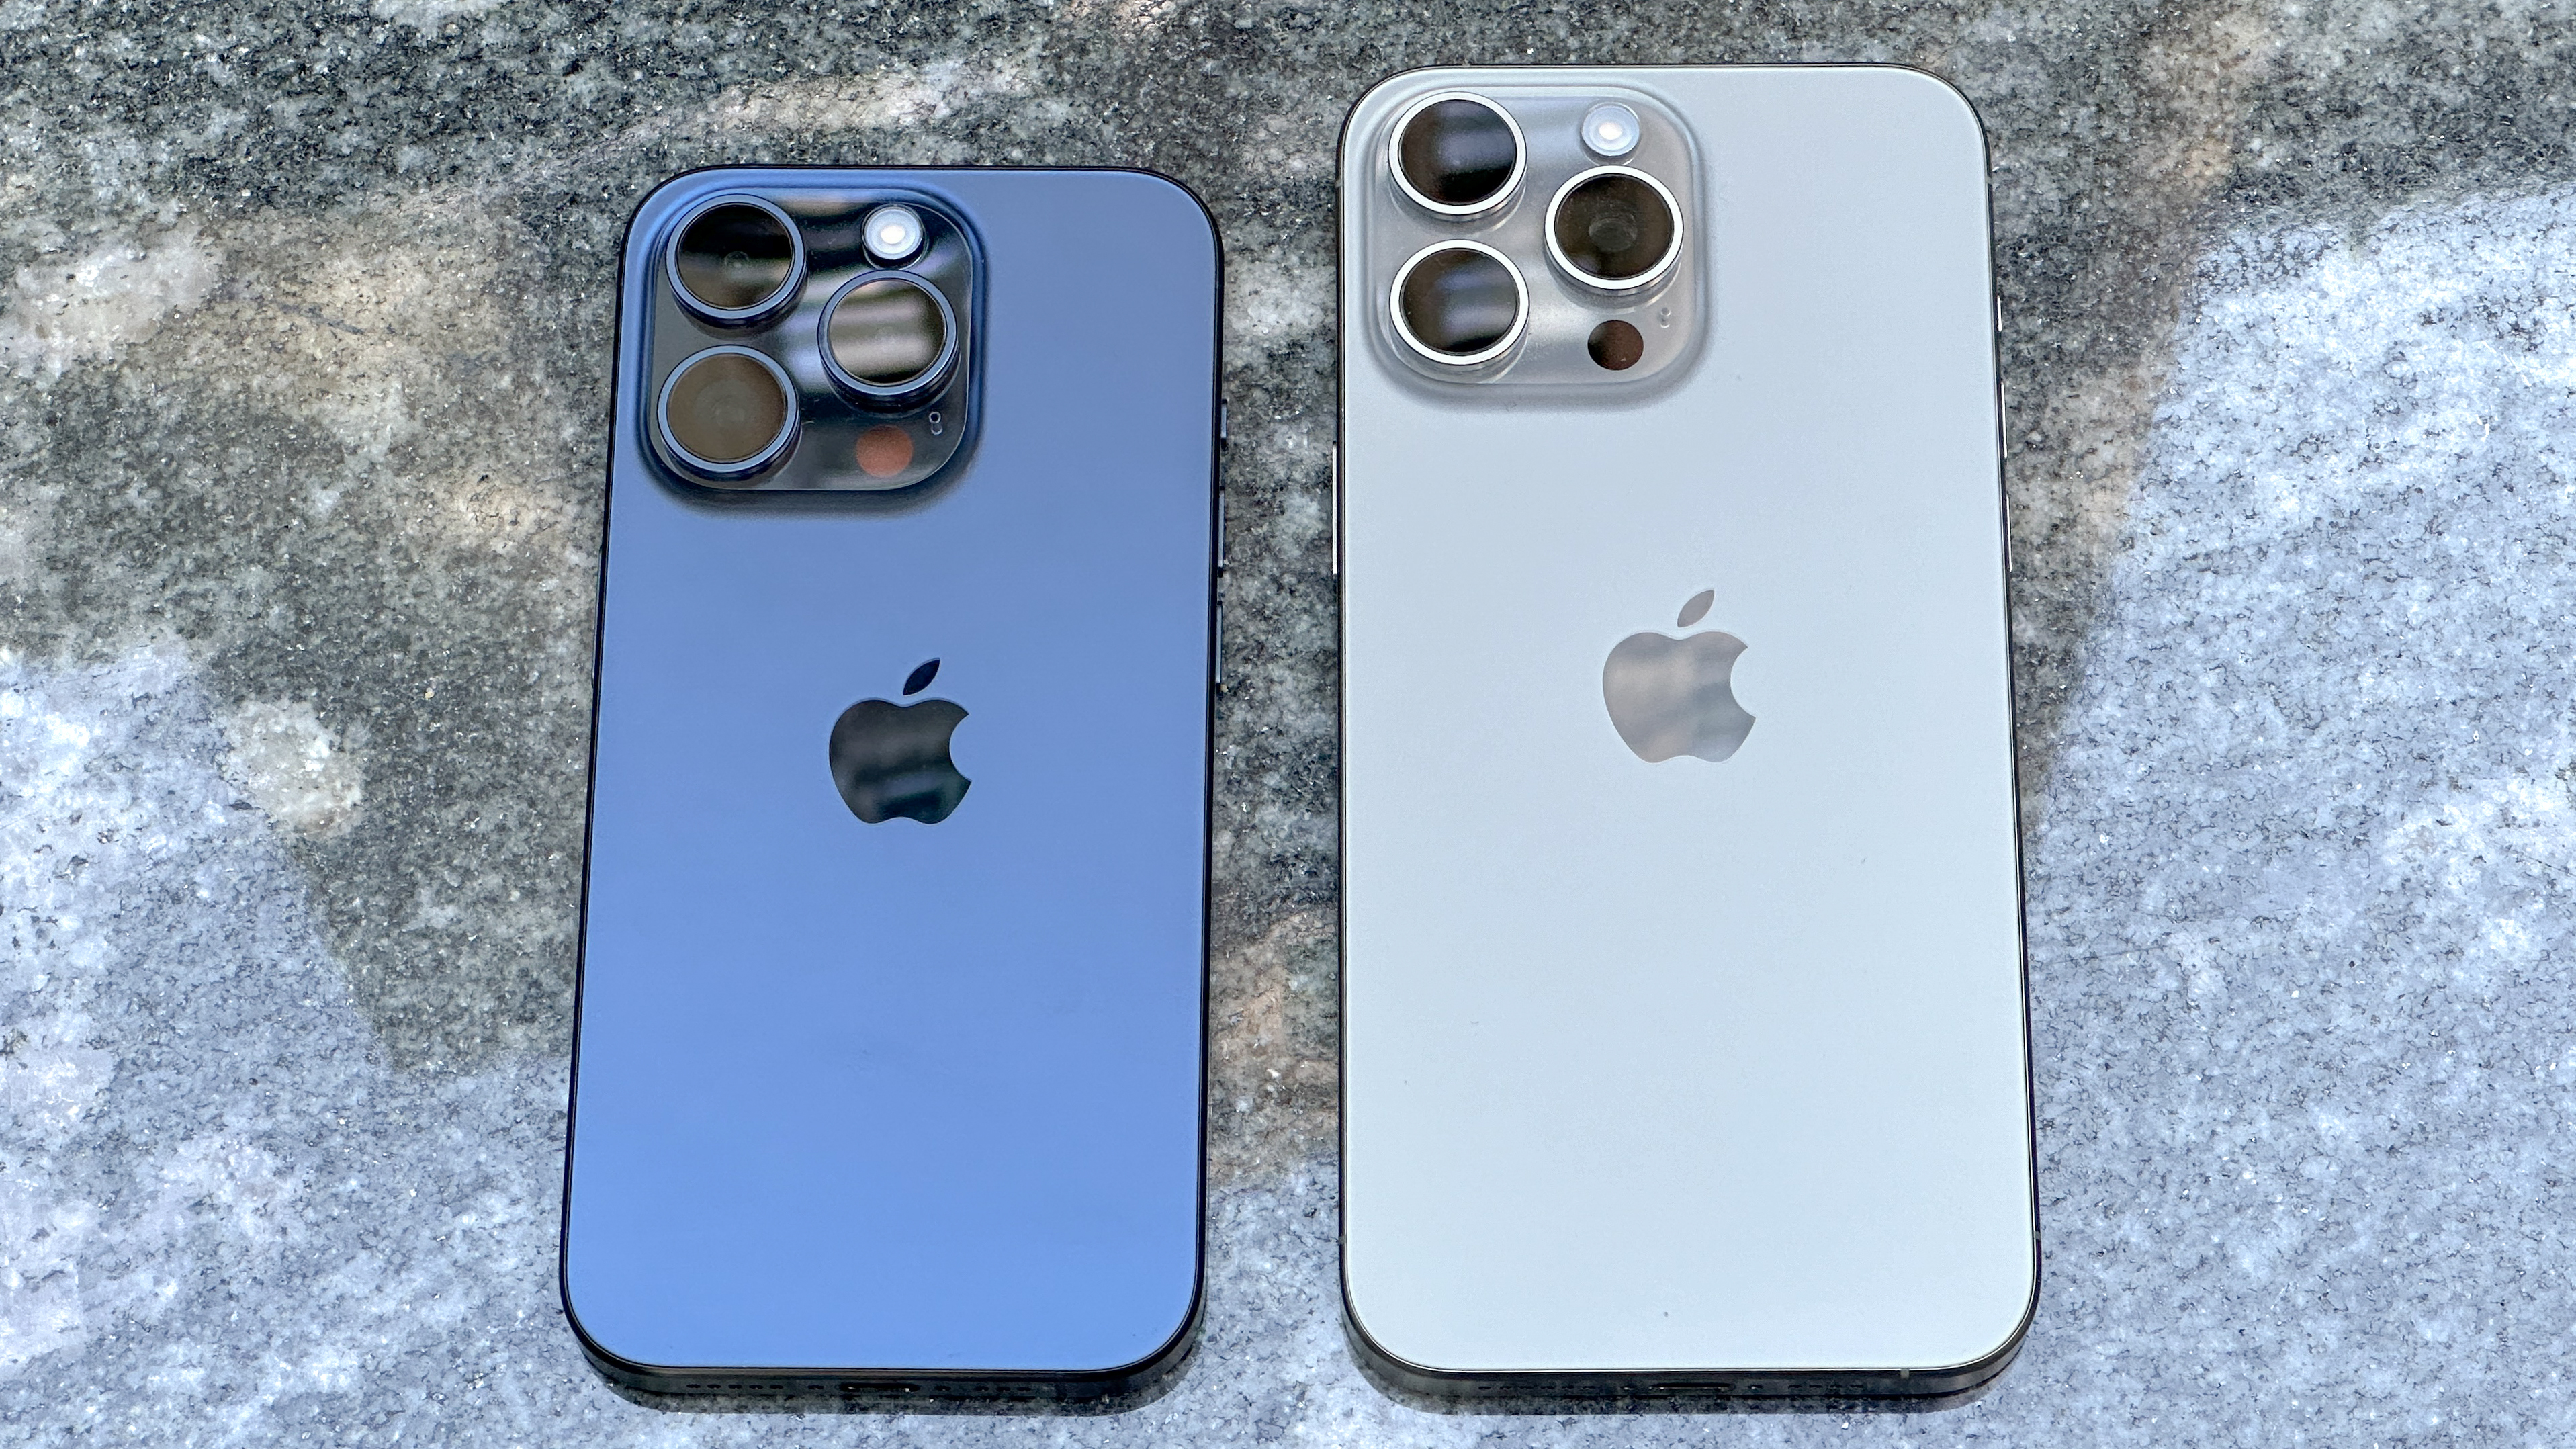 Apple iPhone 15 Pro and Pro Max go all in on photography and